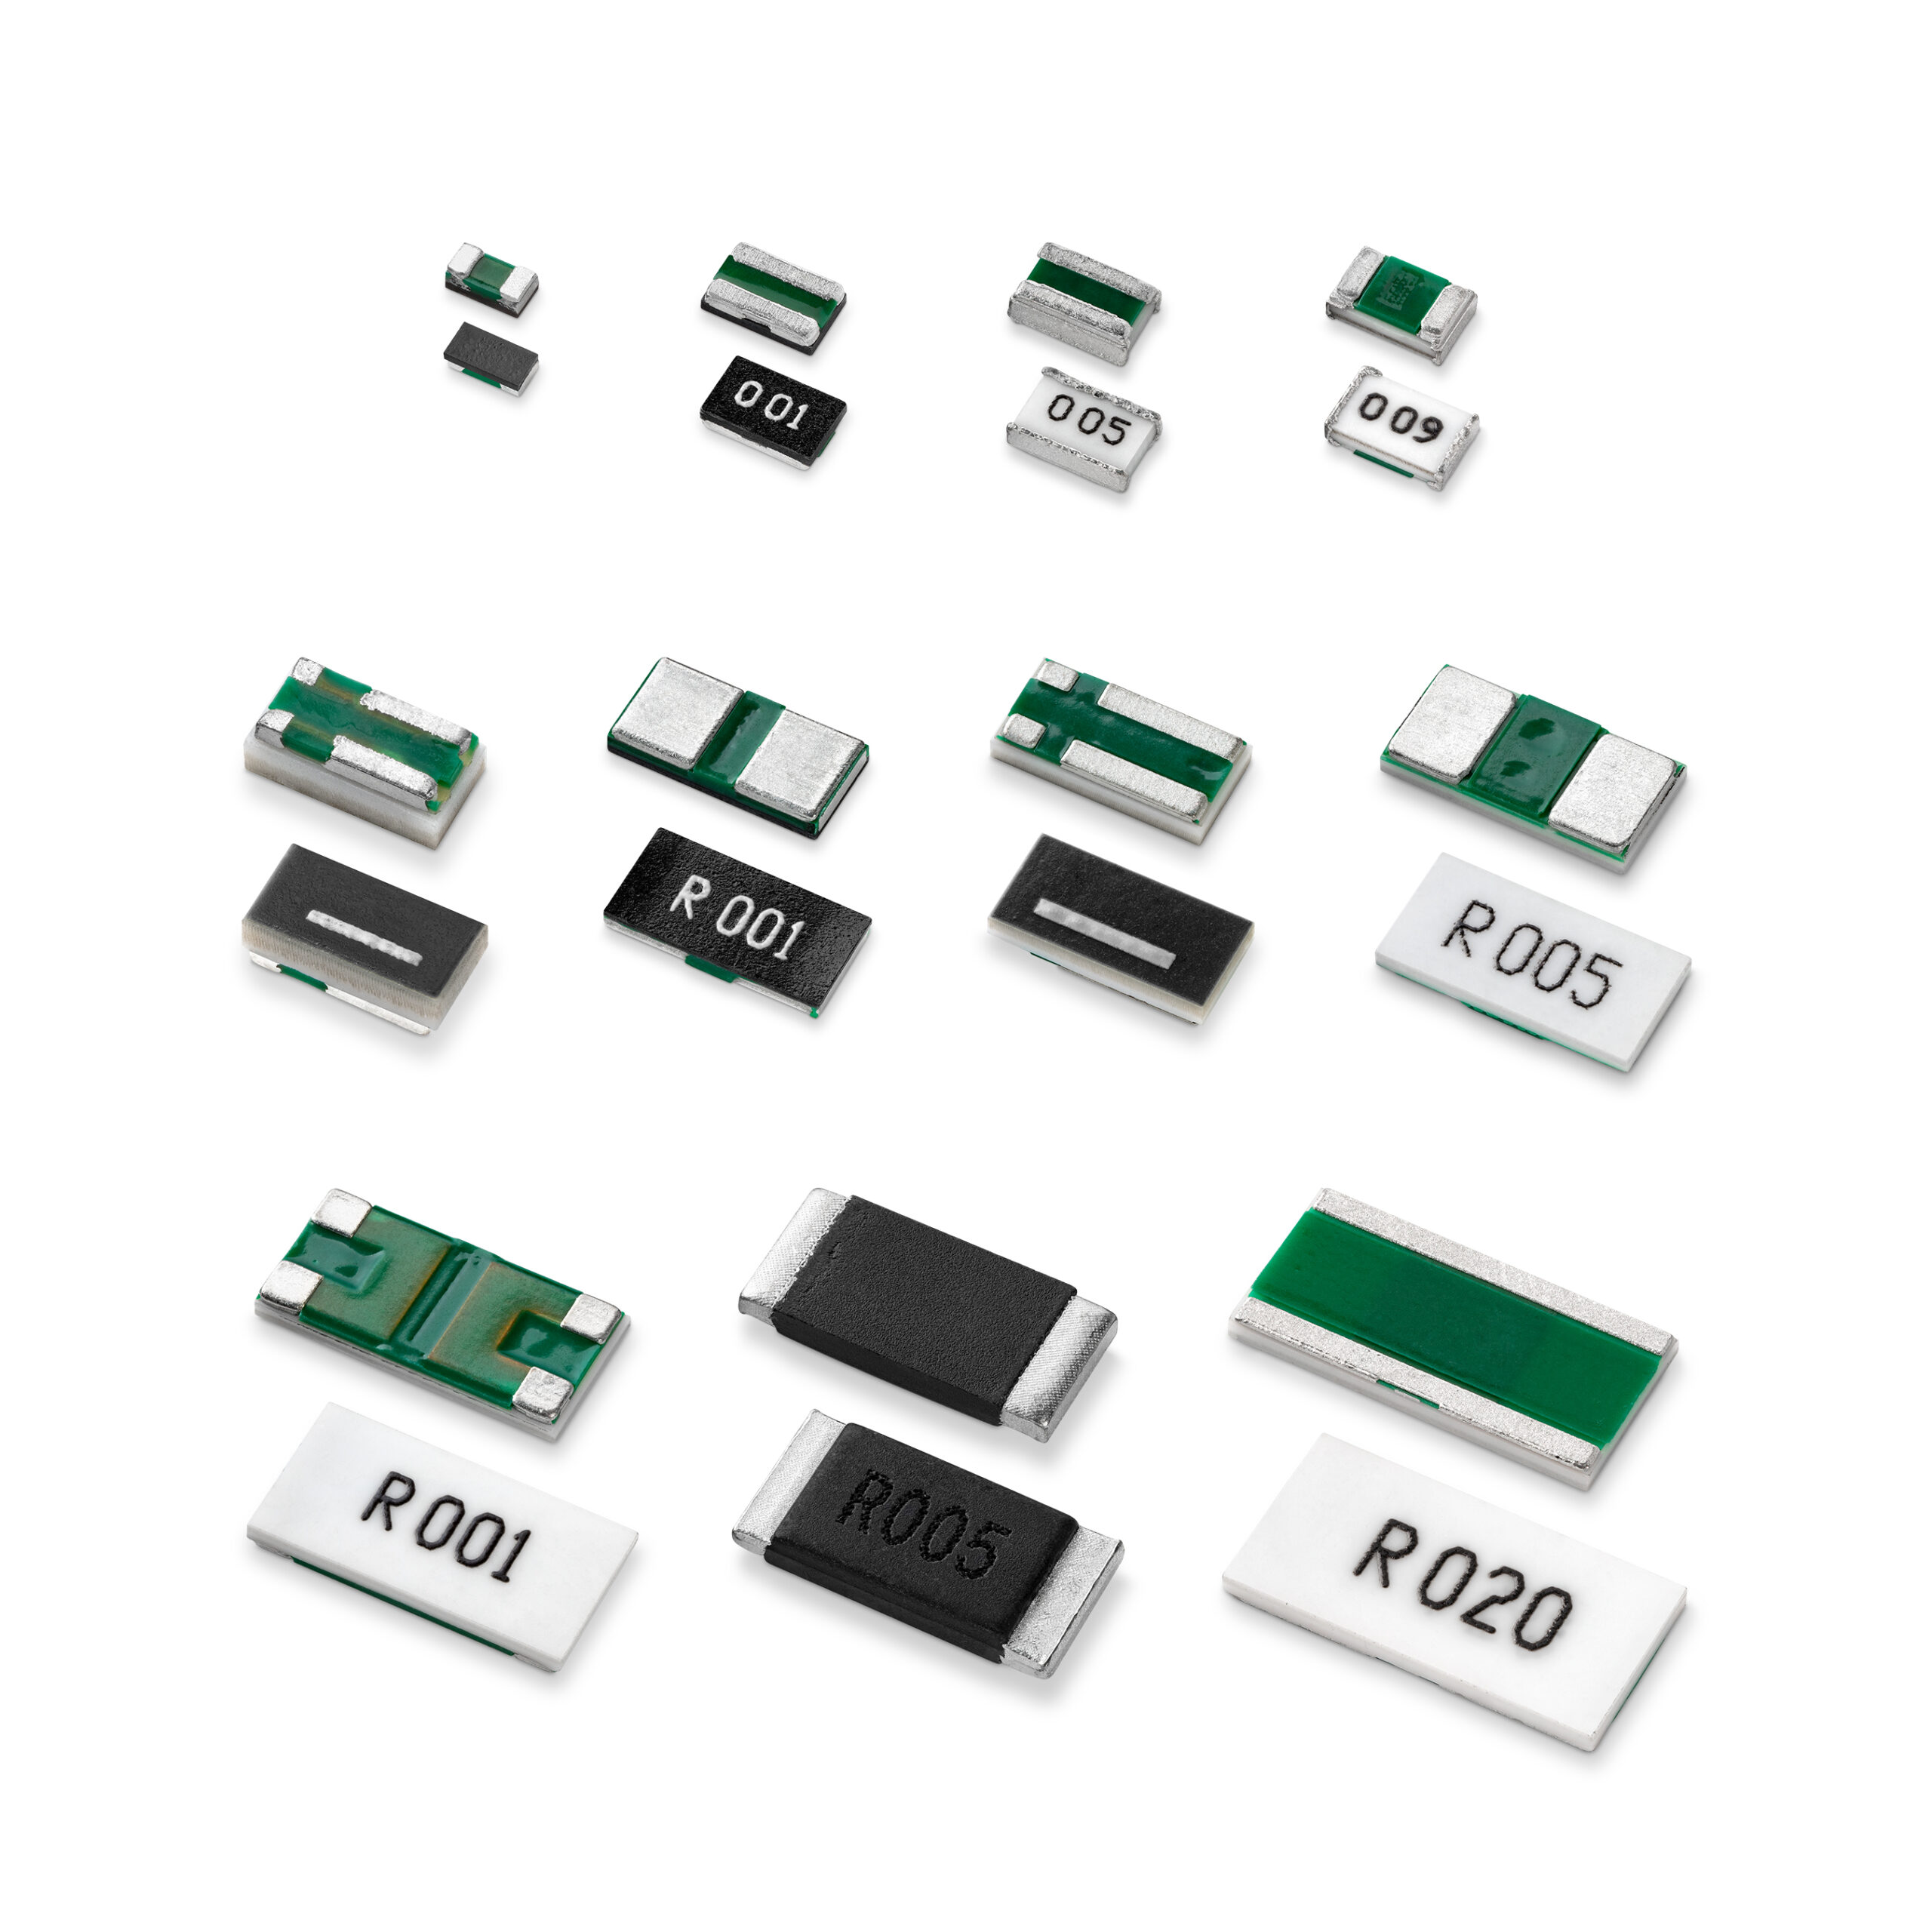 Littelfuse Launches New Current Sensing Resistor Family for Automotive and Consumer Electronics Markets